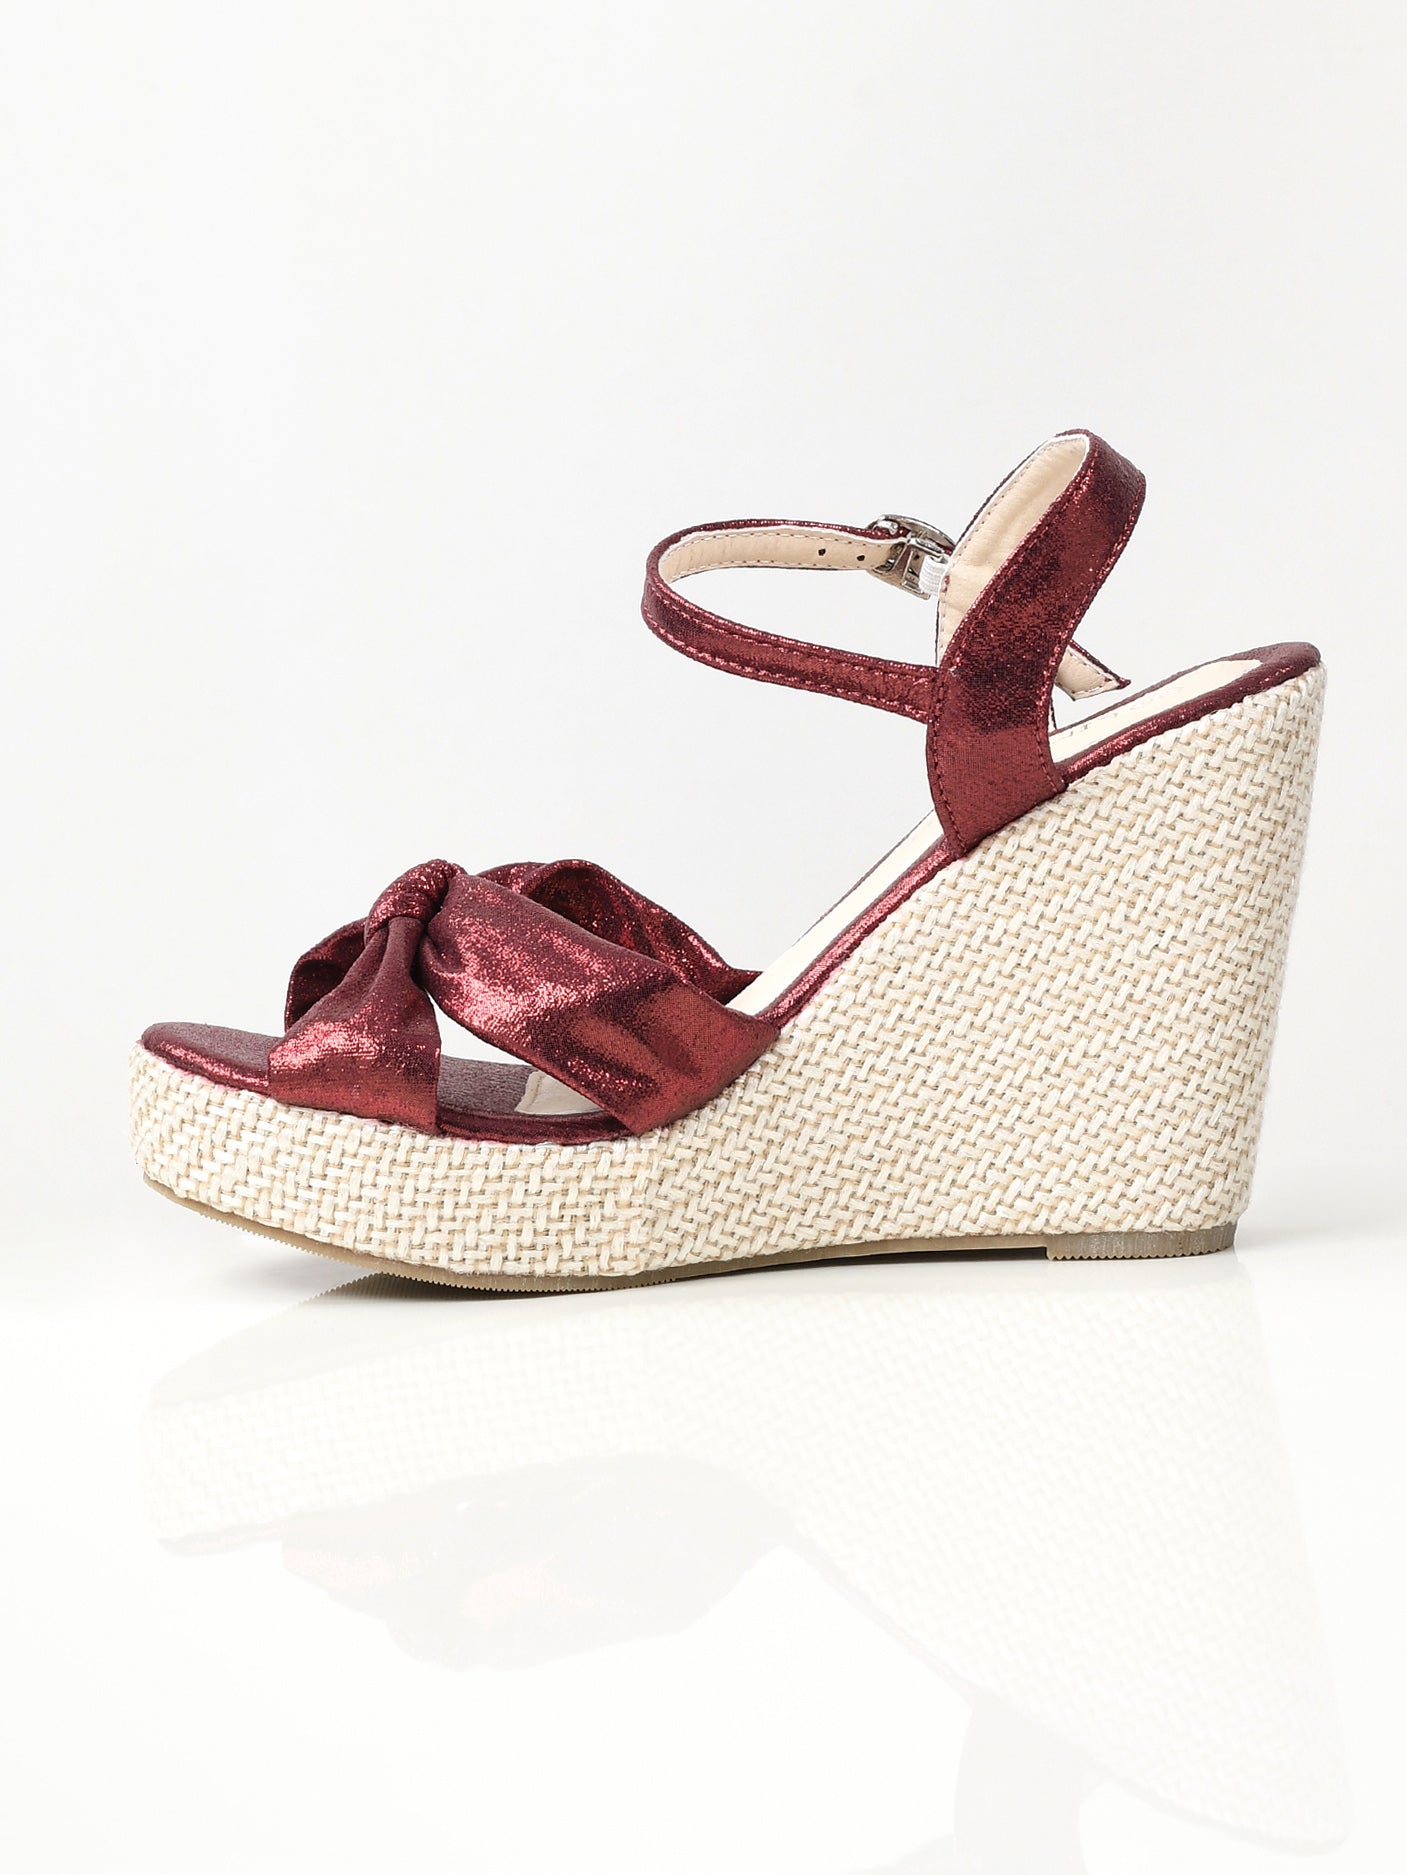 Shiny Knotted Wedges - Maroon